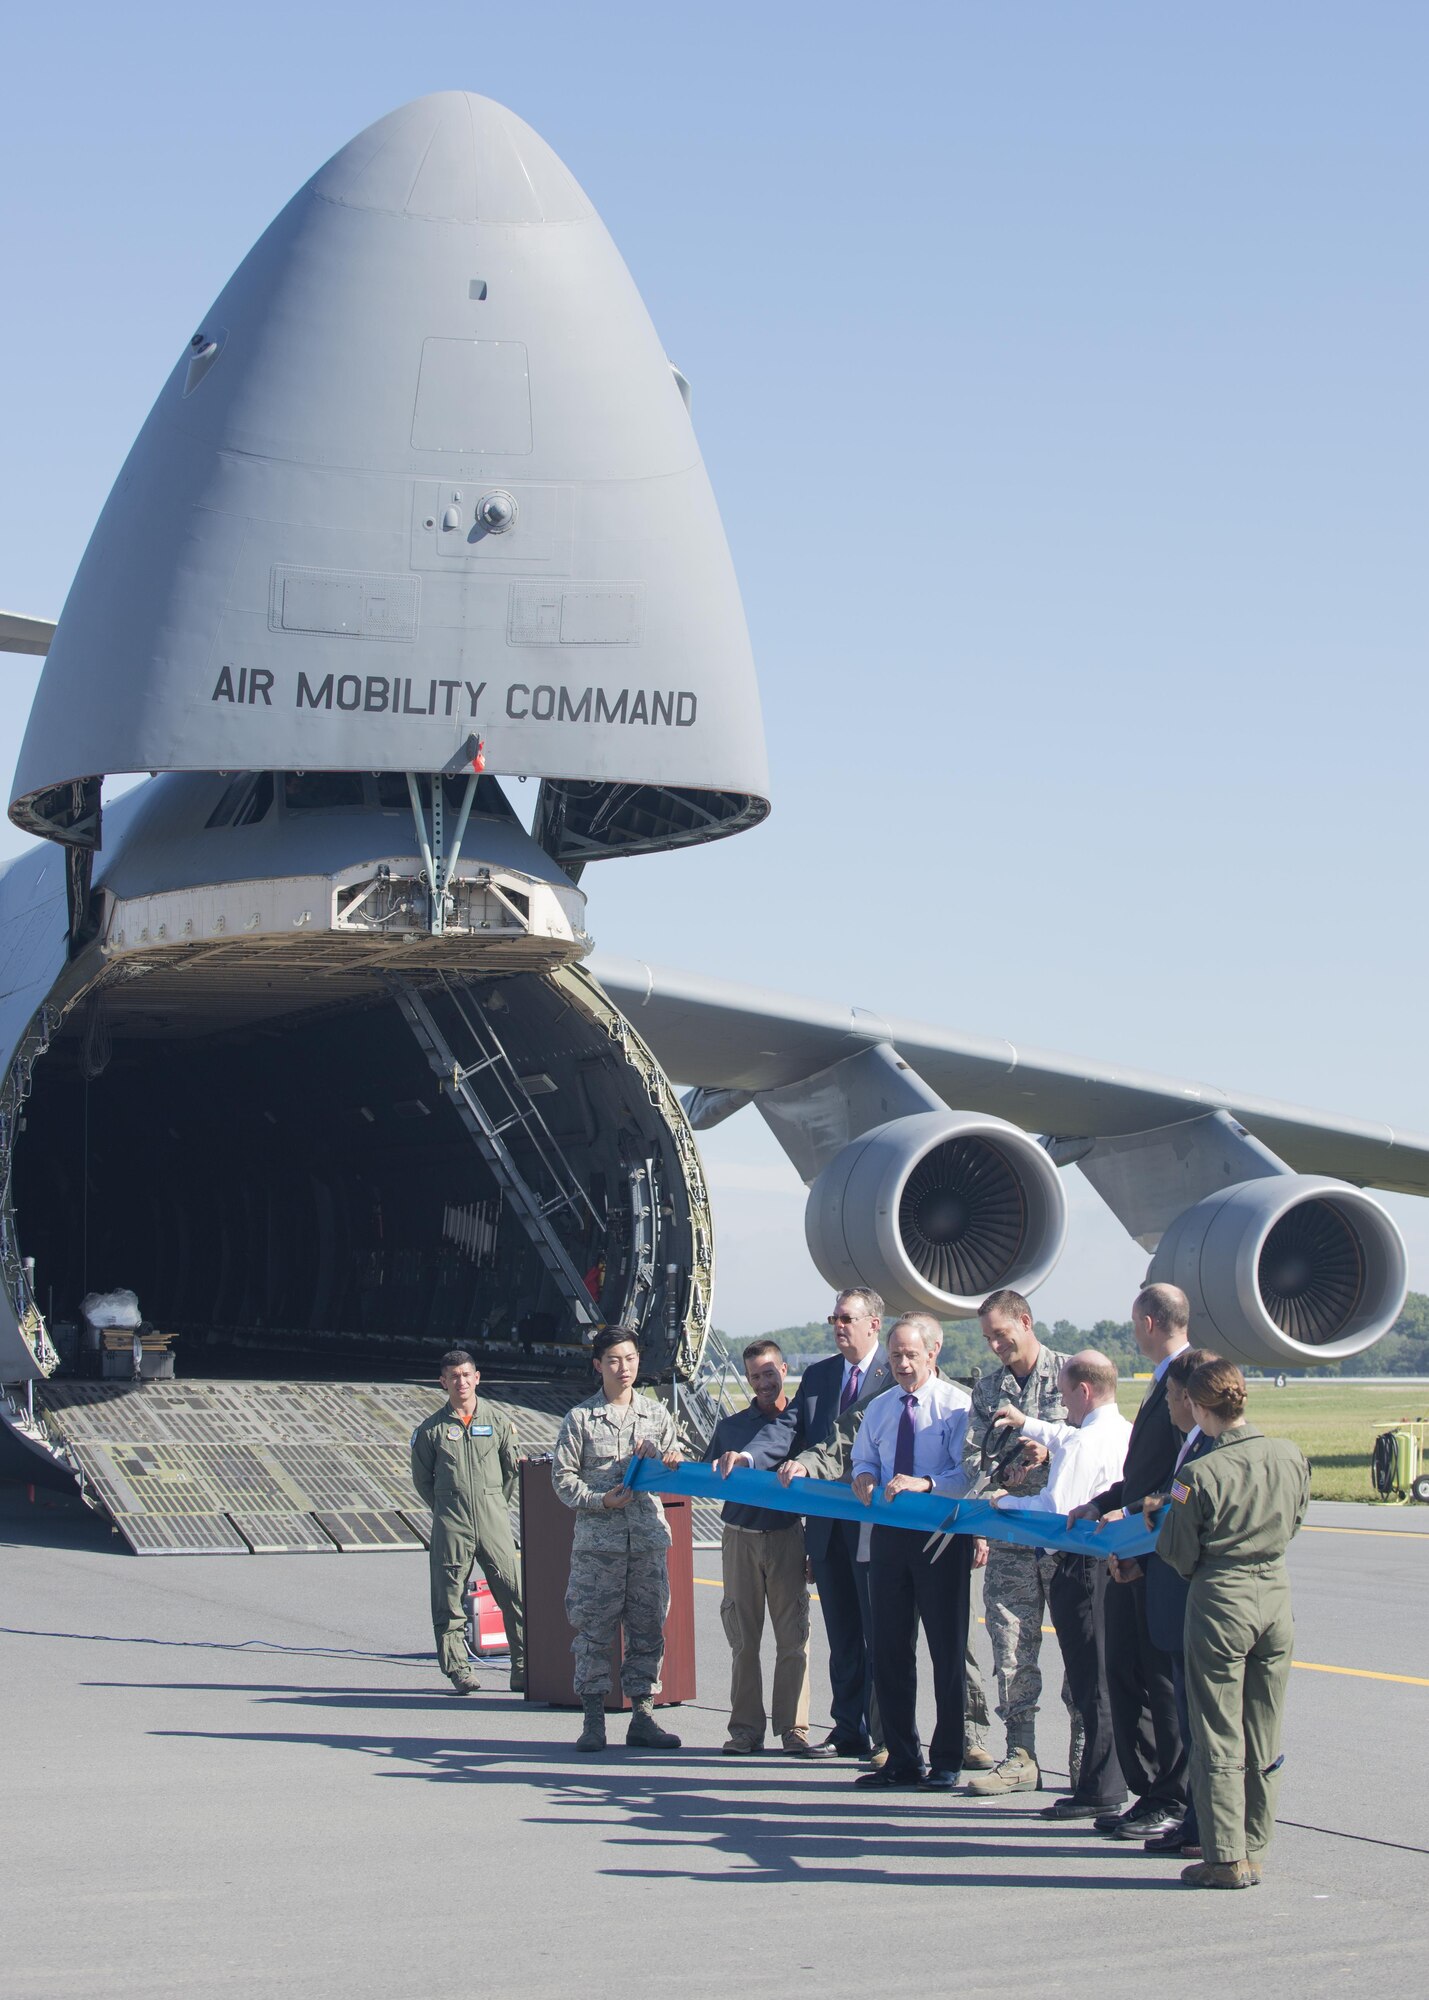 Col. Ethan Griffin, 436th Airlift Wing commander, and Sen. Chris Coons, D-Del.,; cut a ribbon marking the reopening of Runway 01-19 during anafter completion of Phase II of an extensive reconstruction project Sept. 23, 2016, at Dover Air Force Base, Del. Shown from left, Airman 1st Class Joseph Cho, 436th Aircraft Maintenance Squadron; Tony Price, sub-contractor representative; Jeff Wagonhurst, Versar Inc. president and CEO; Col. Scott Durham, 512th AW commander; Sen. Tom Carper, D-Del.; Col. Ethan Griffin, 436th AW commander; Sen. Chris Coons, D-Del.; Drew Slater, Rep. John Carney D-Del. representative; Robin Christiansen, Mayor of Dover; and Airman 1st Class Paula Padilla, 9th Airlift Squadron loadmaster. (U.S. Air Force photo by Staff Sgt. Jared Duhon)  